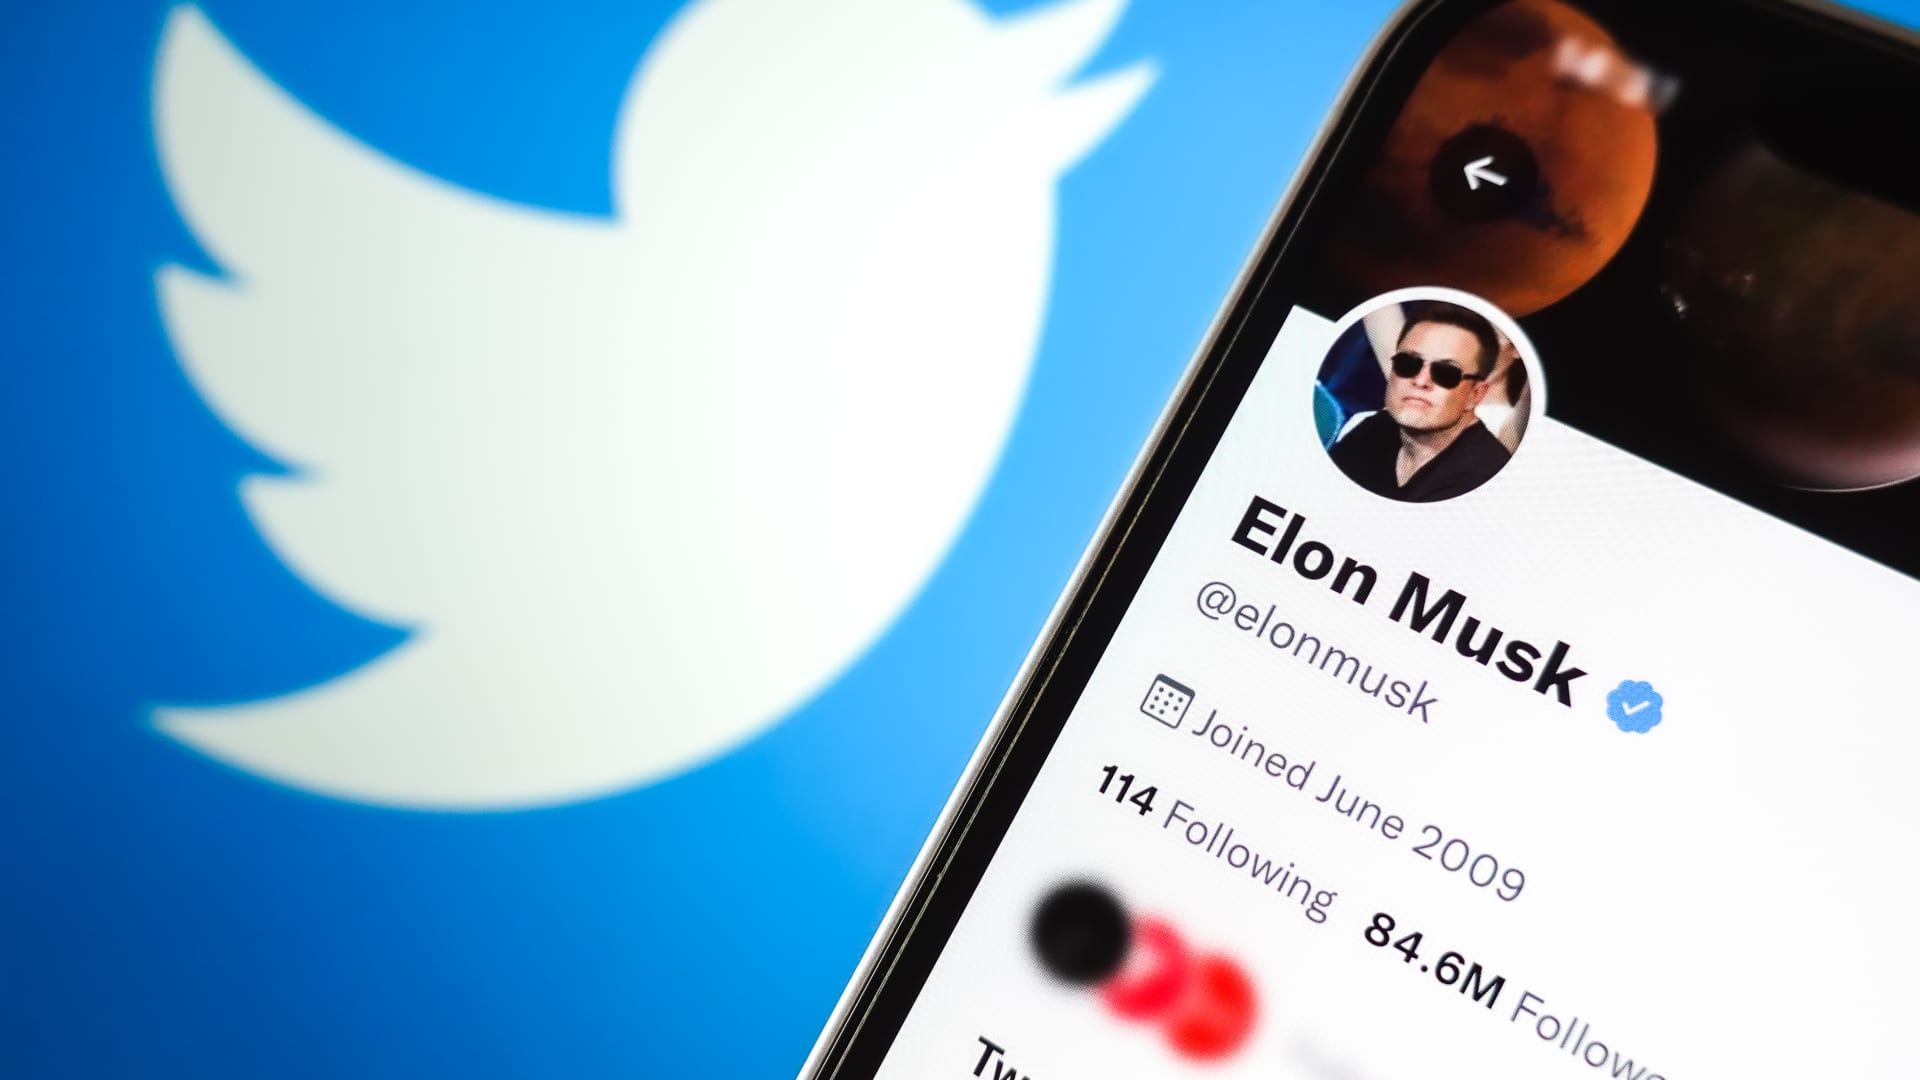 Banned Twitter users won’t return for at least another few weeks, Musk says